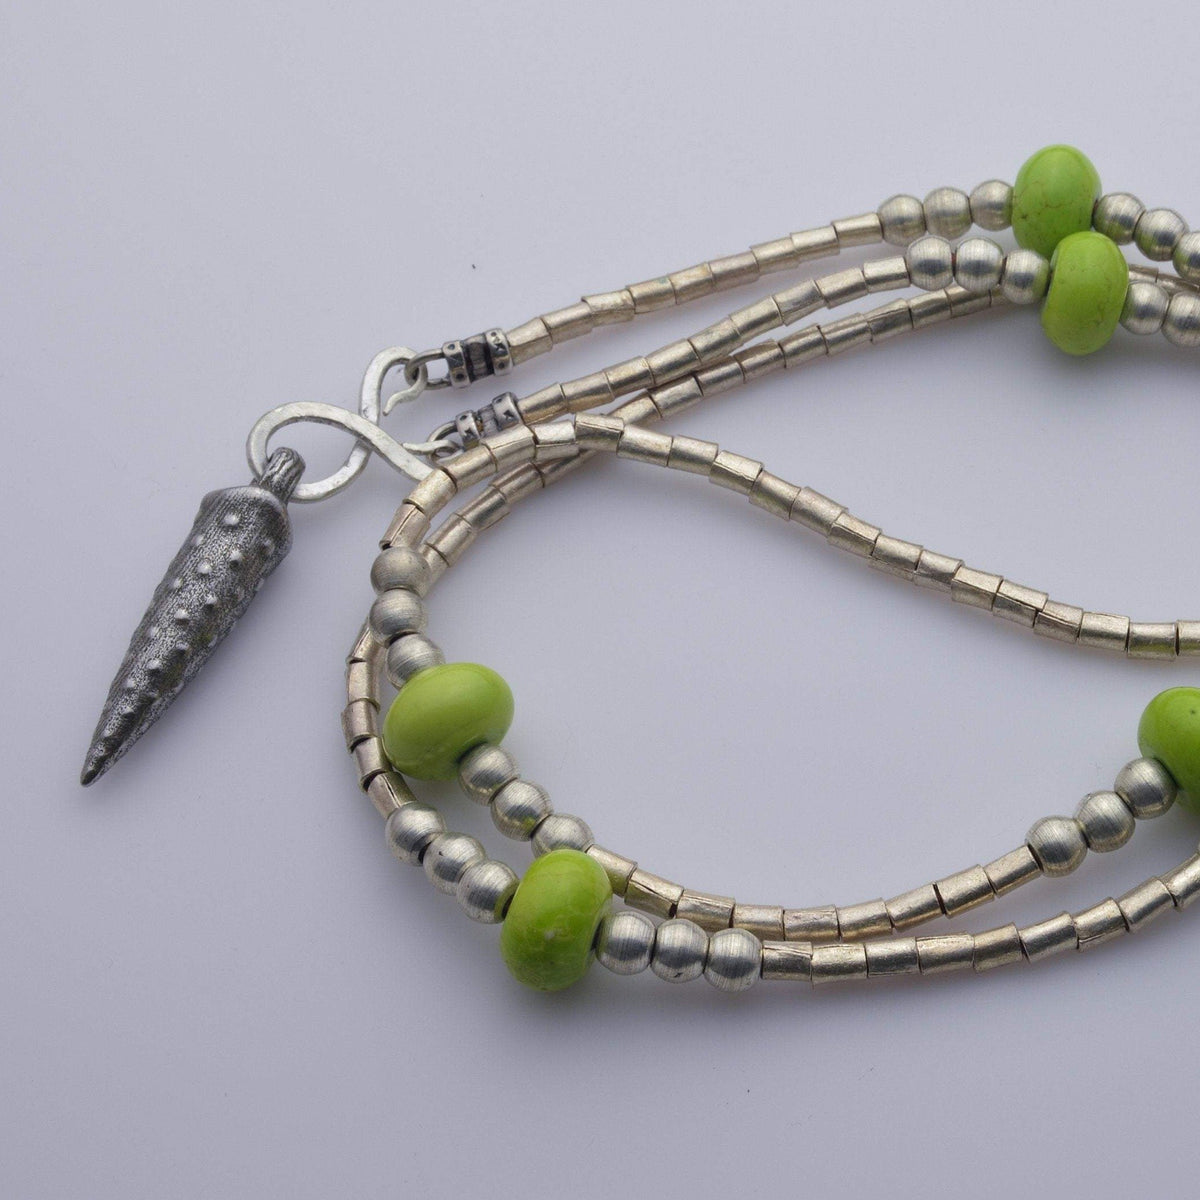 African beads with bullet iron pendant